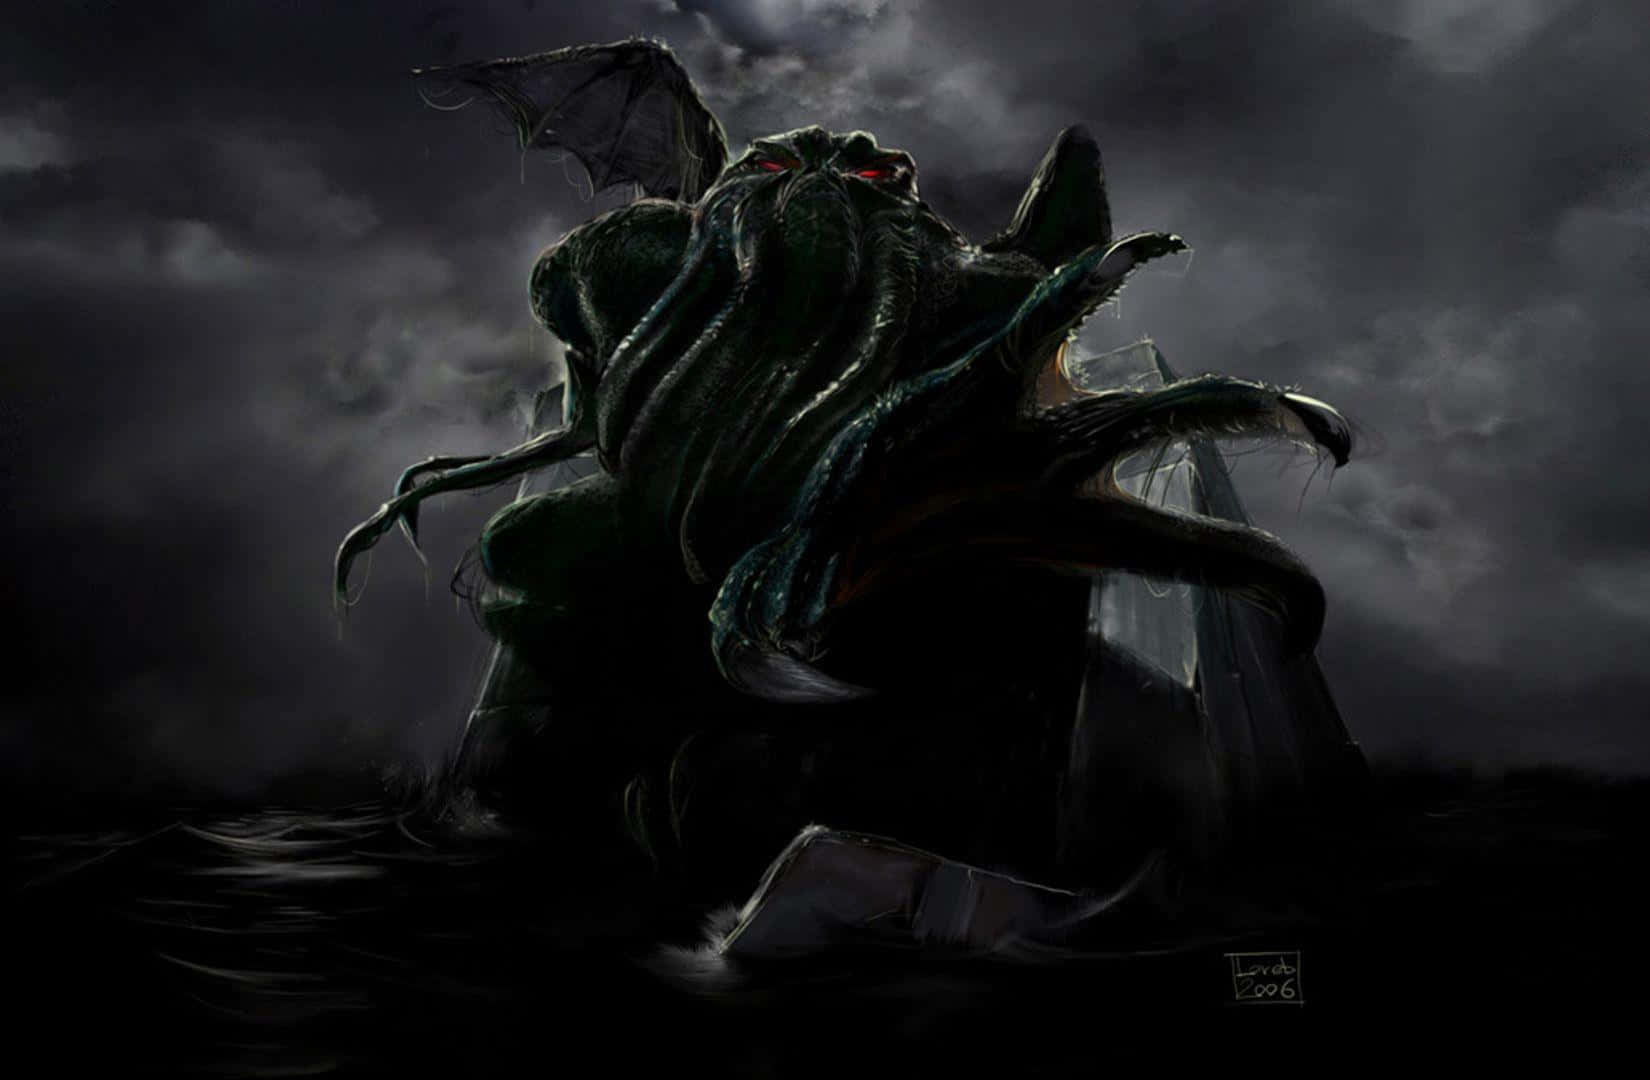 Unearthly Nightmare - The Dark Lord Cthulhu